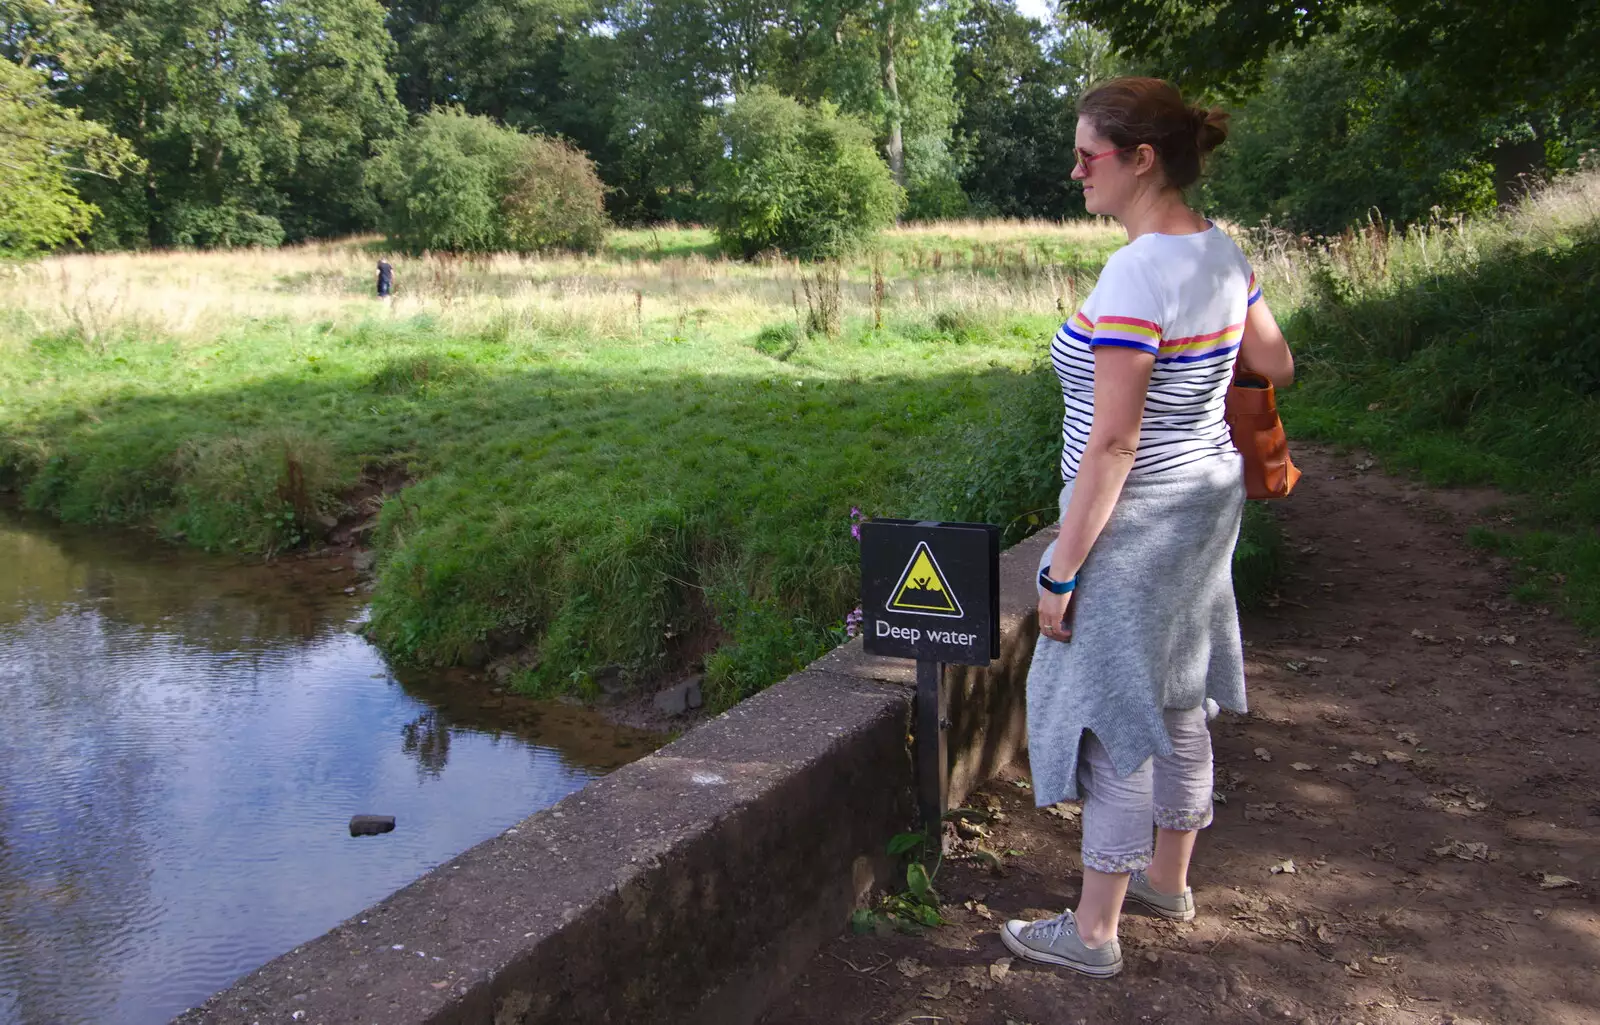 Isobel looks out over a stream, from Kenilworth Castle and the 69th Entry Reunion Dinner, Stratford, Warwickshire - 14th September 2019